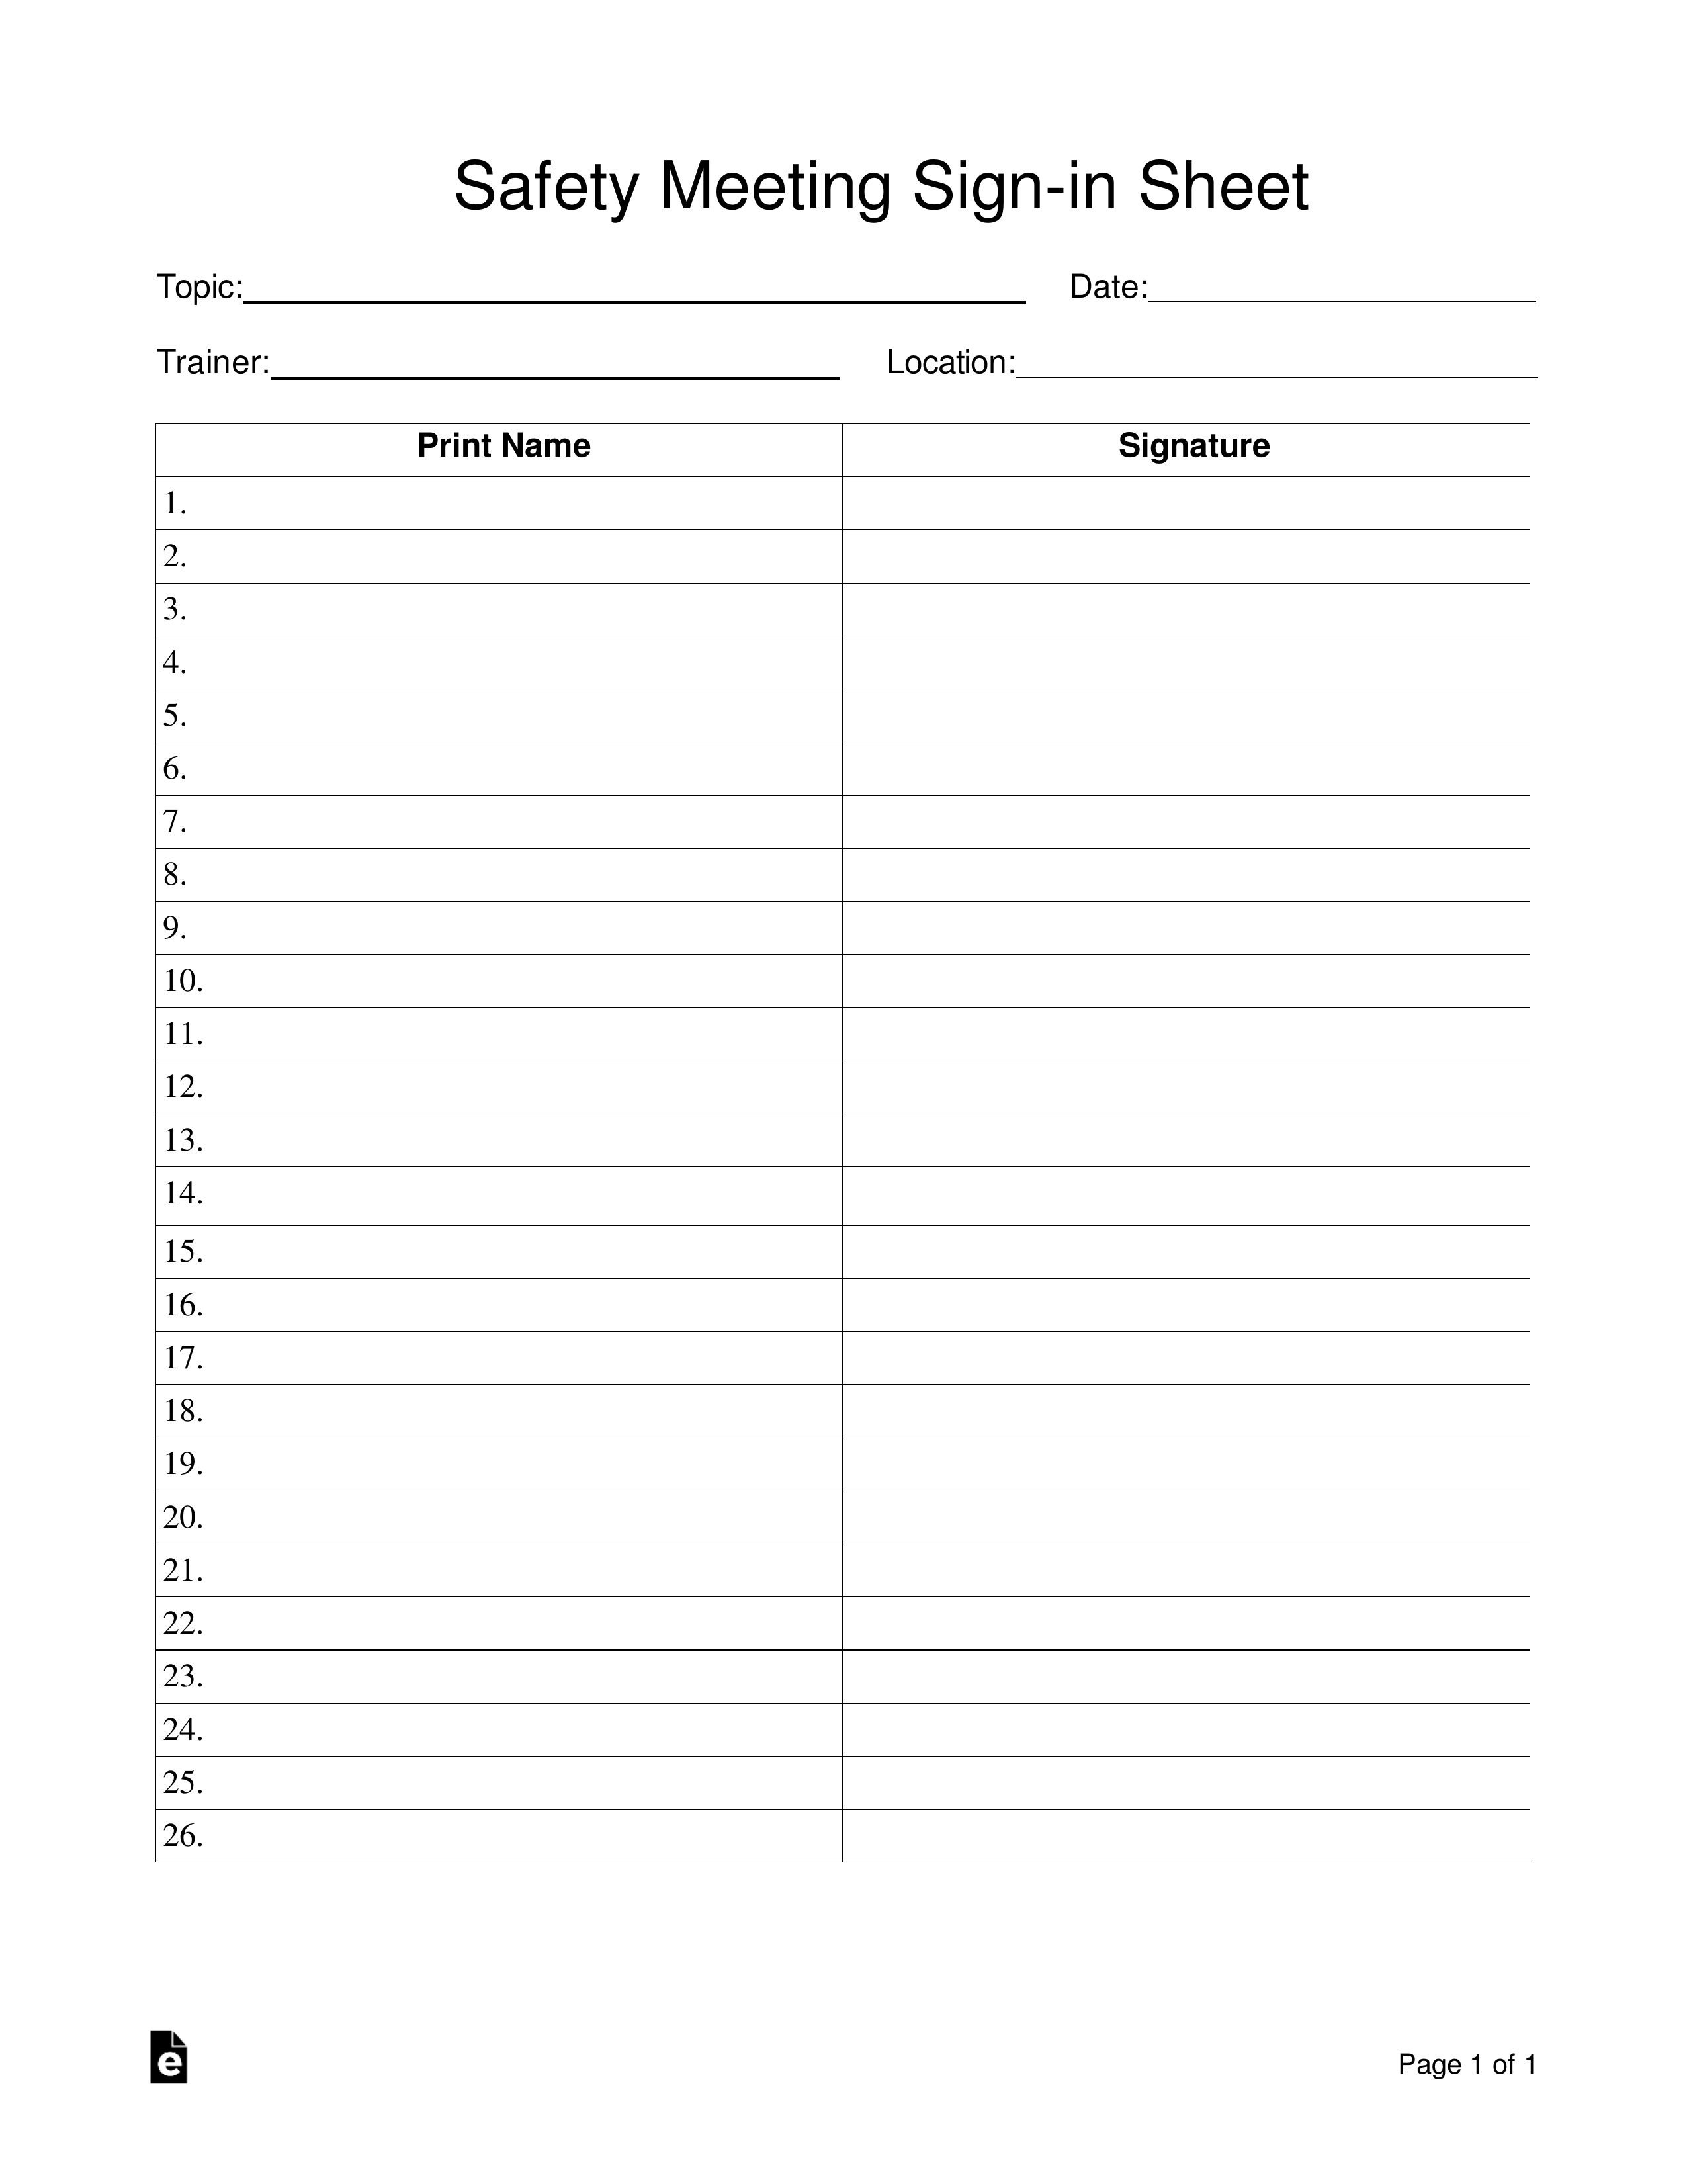 free-safety-meeting-sign-in-sheet-template-pdf-word-eforms-hot-sex